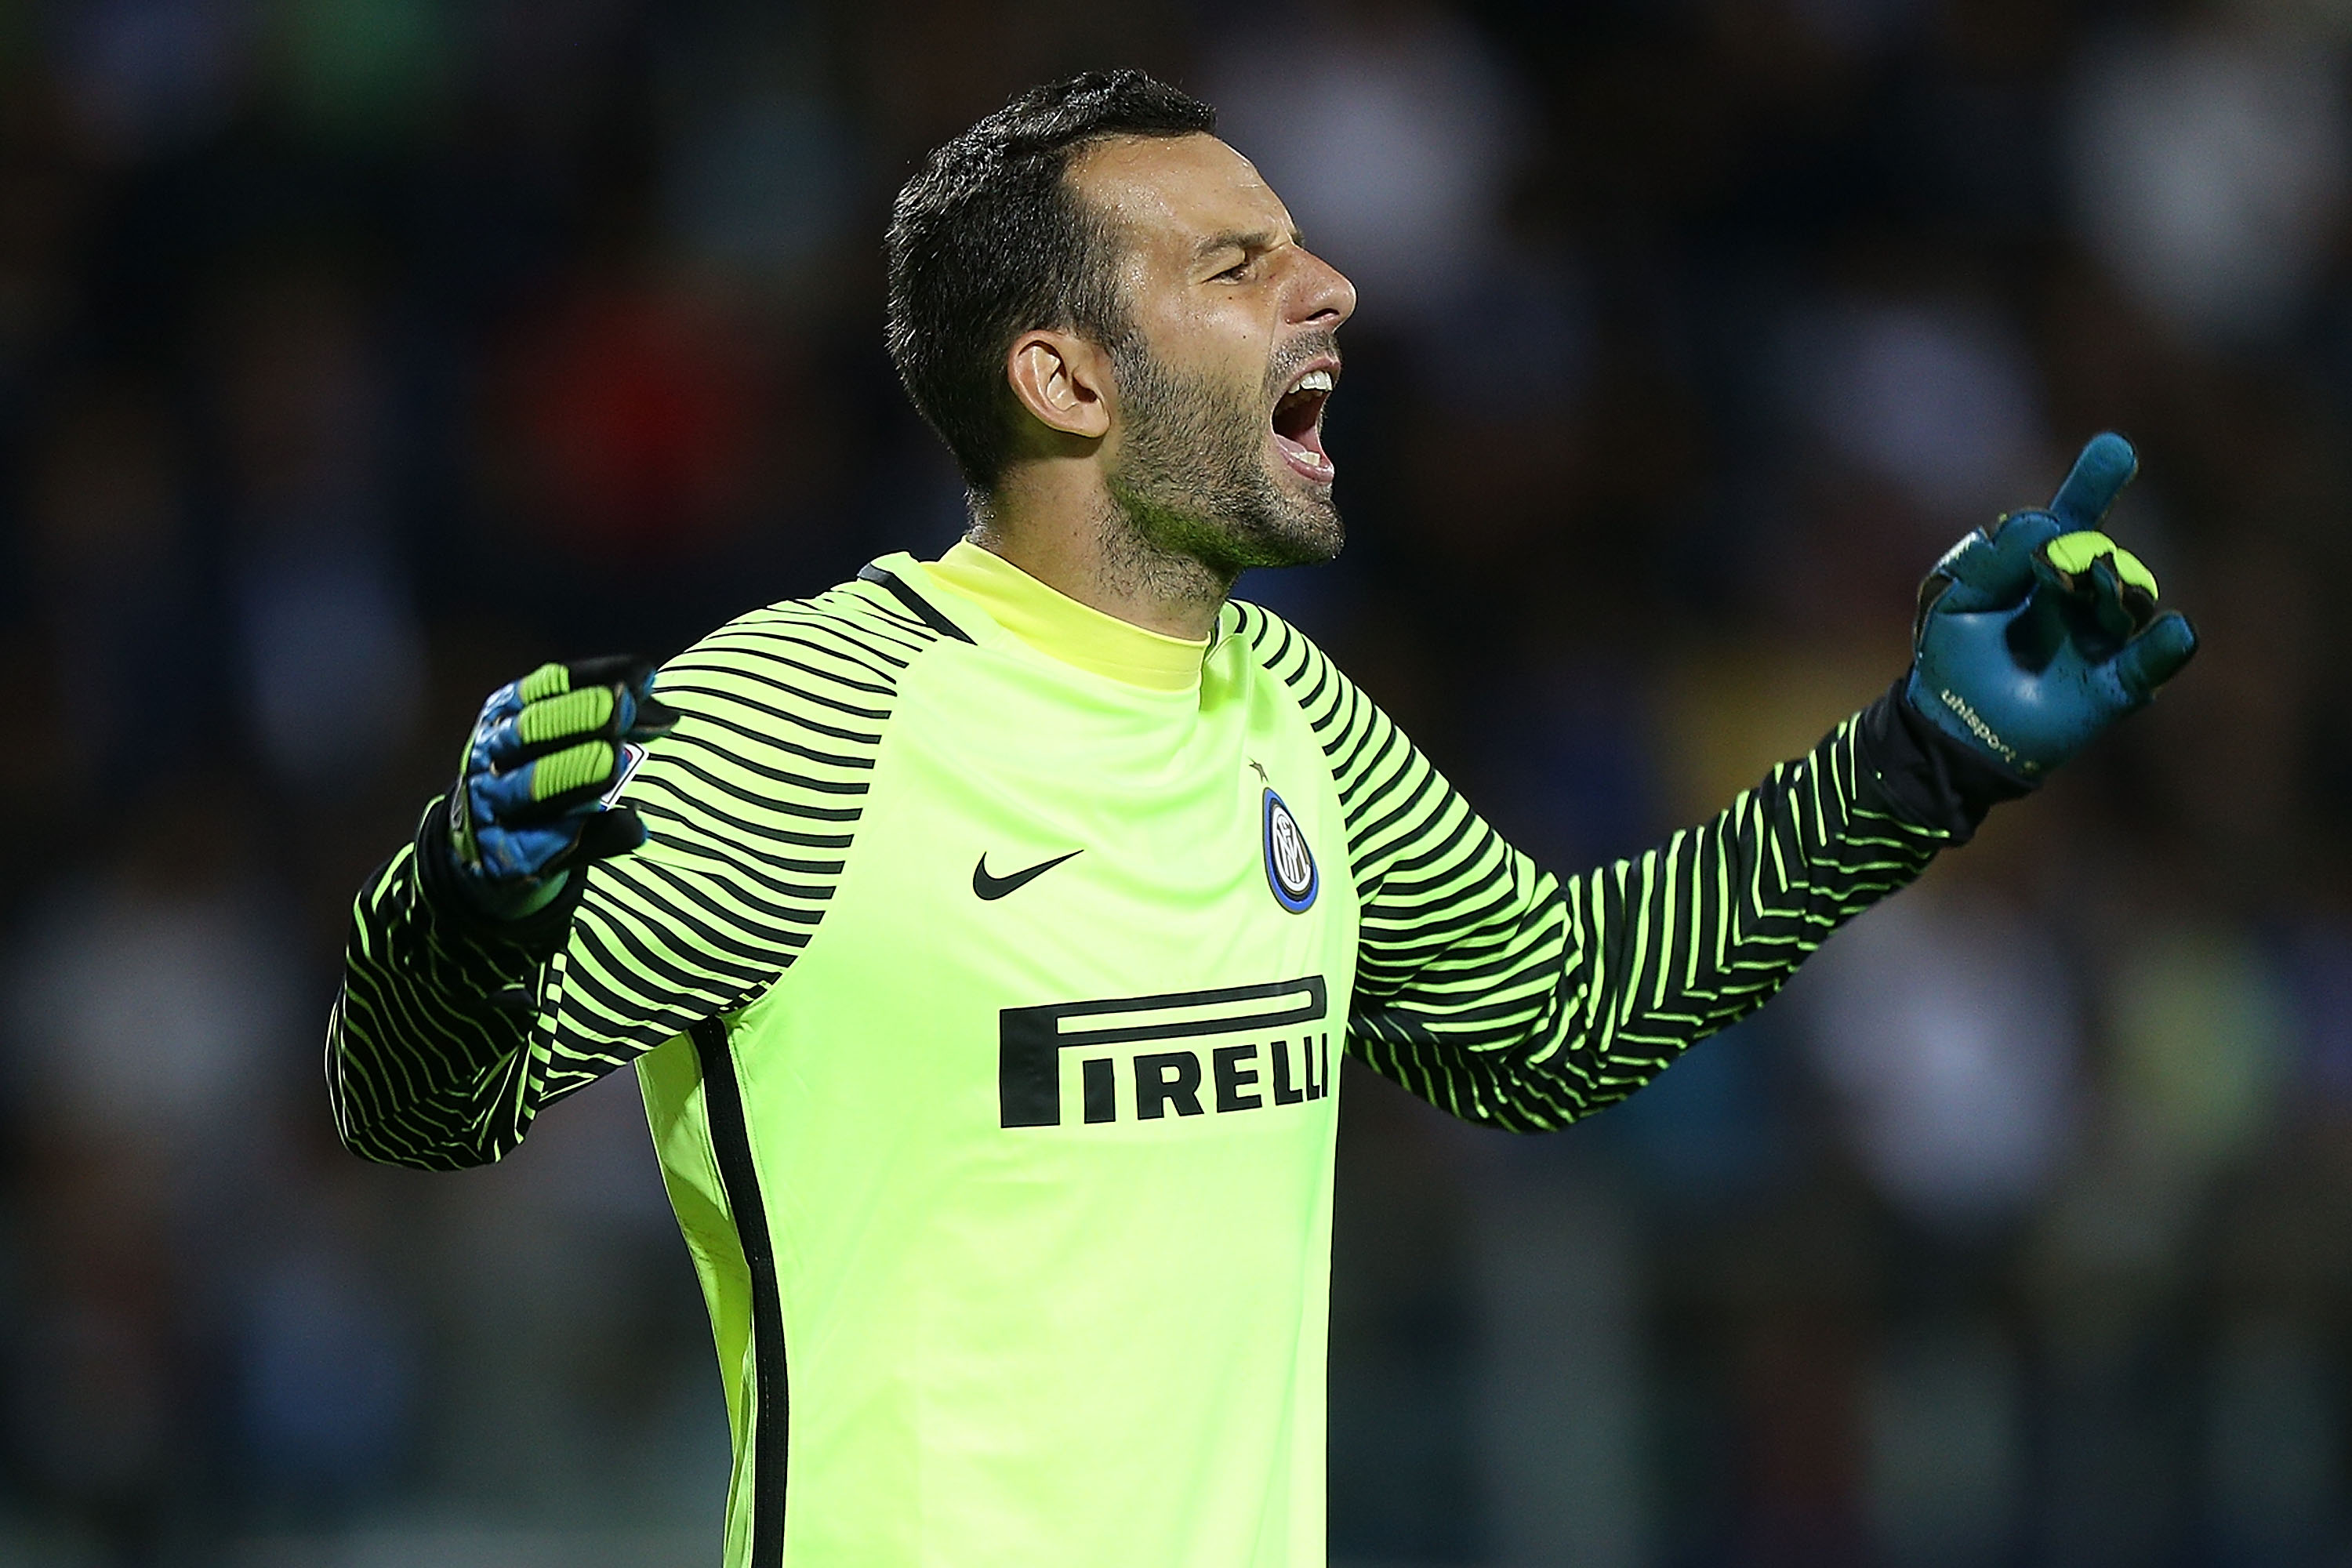 Will the Inter Milan captain step up? (Photo by Gabriele Maltinti/Getty Images)